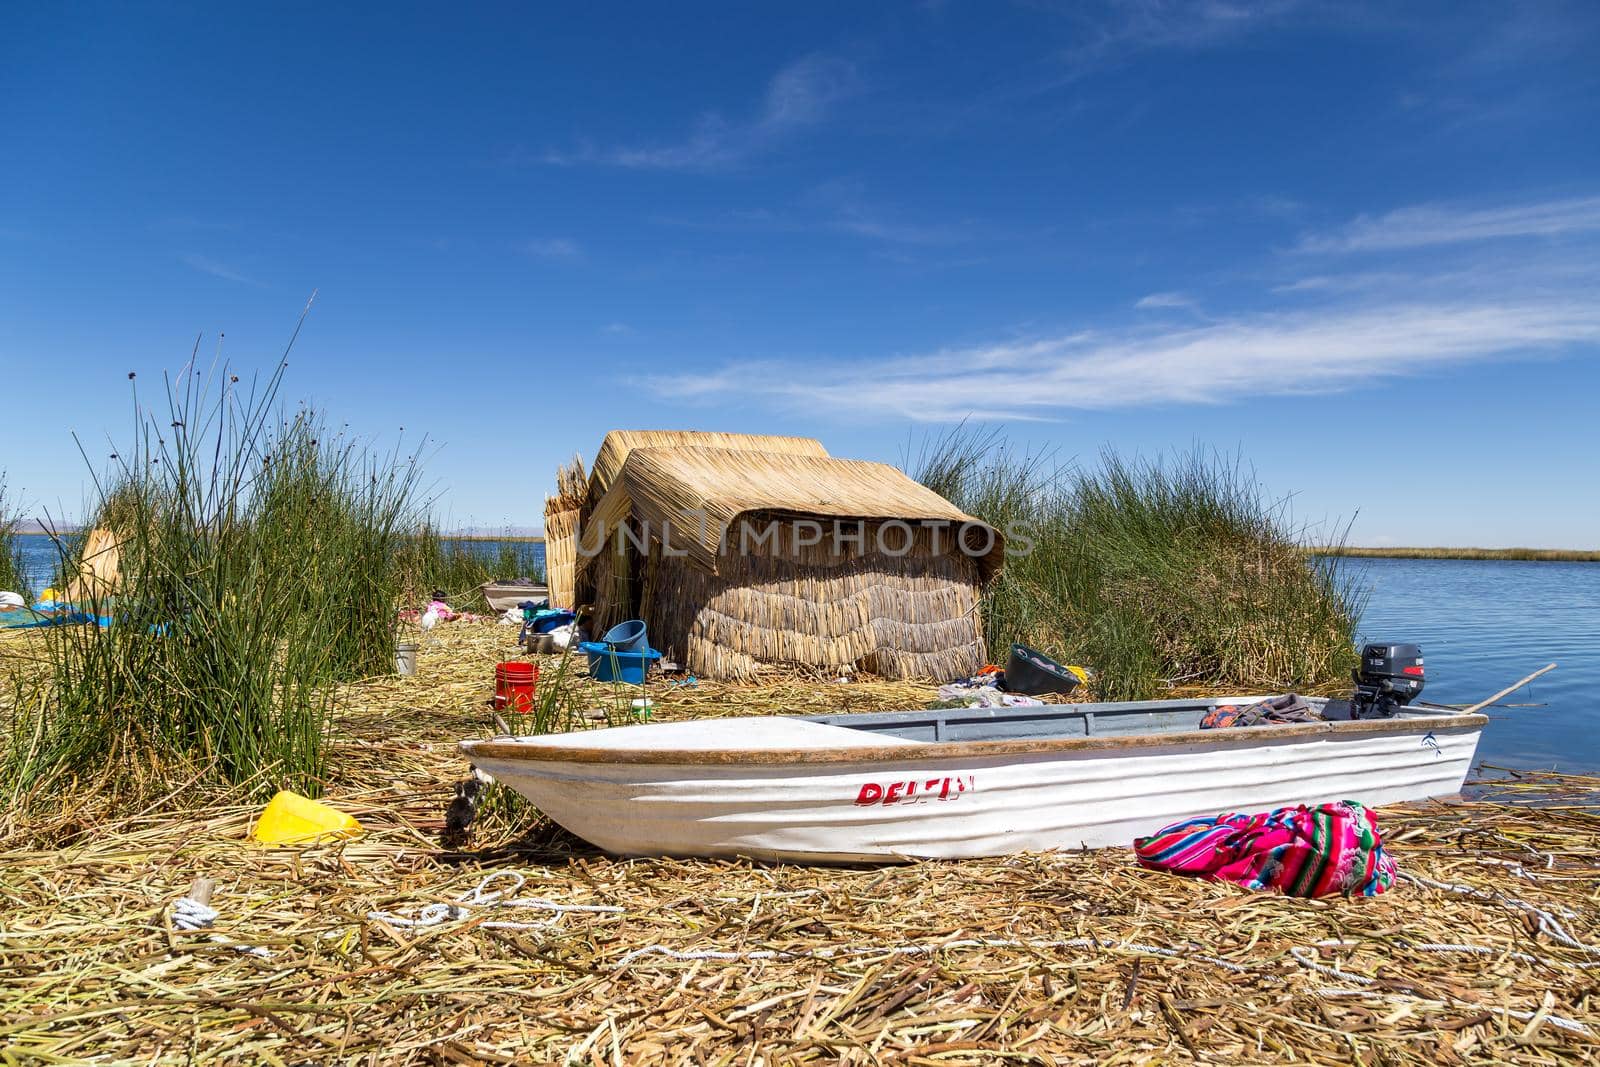 Titicaca Lake, Peru - October 14, 2015: Straw huts and a boat on one of the Titino Floating Islands on the Titicaca Lake.